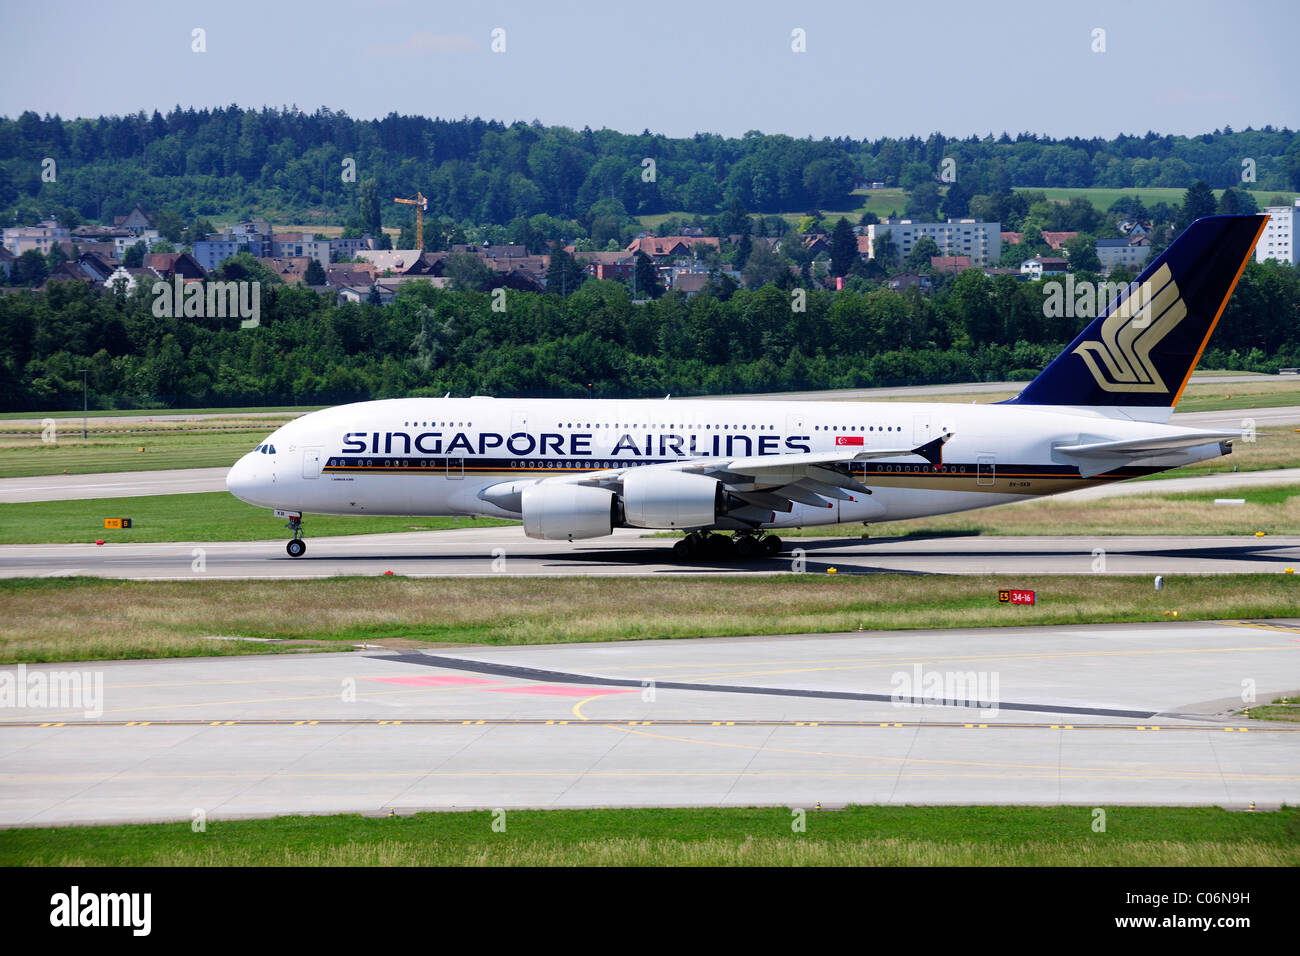 Airbus 380 from Singapore Airlines during take-off, Zurich Airport, Switzerland, Europe Stock Photo